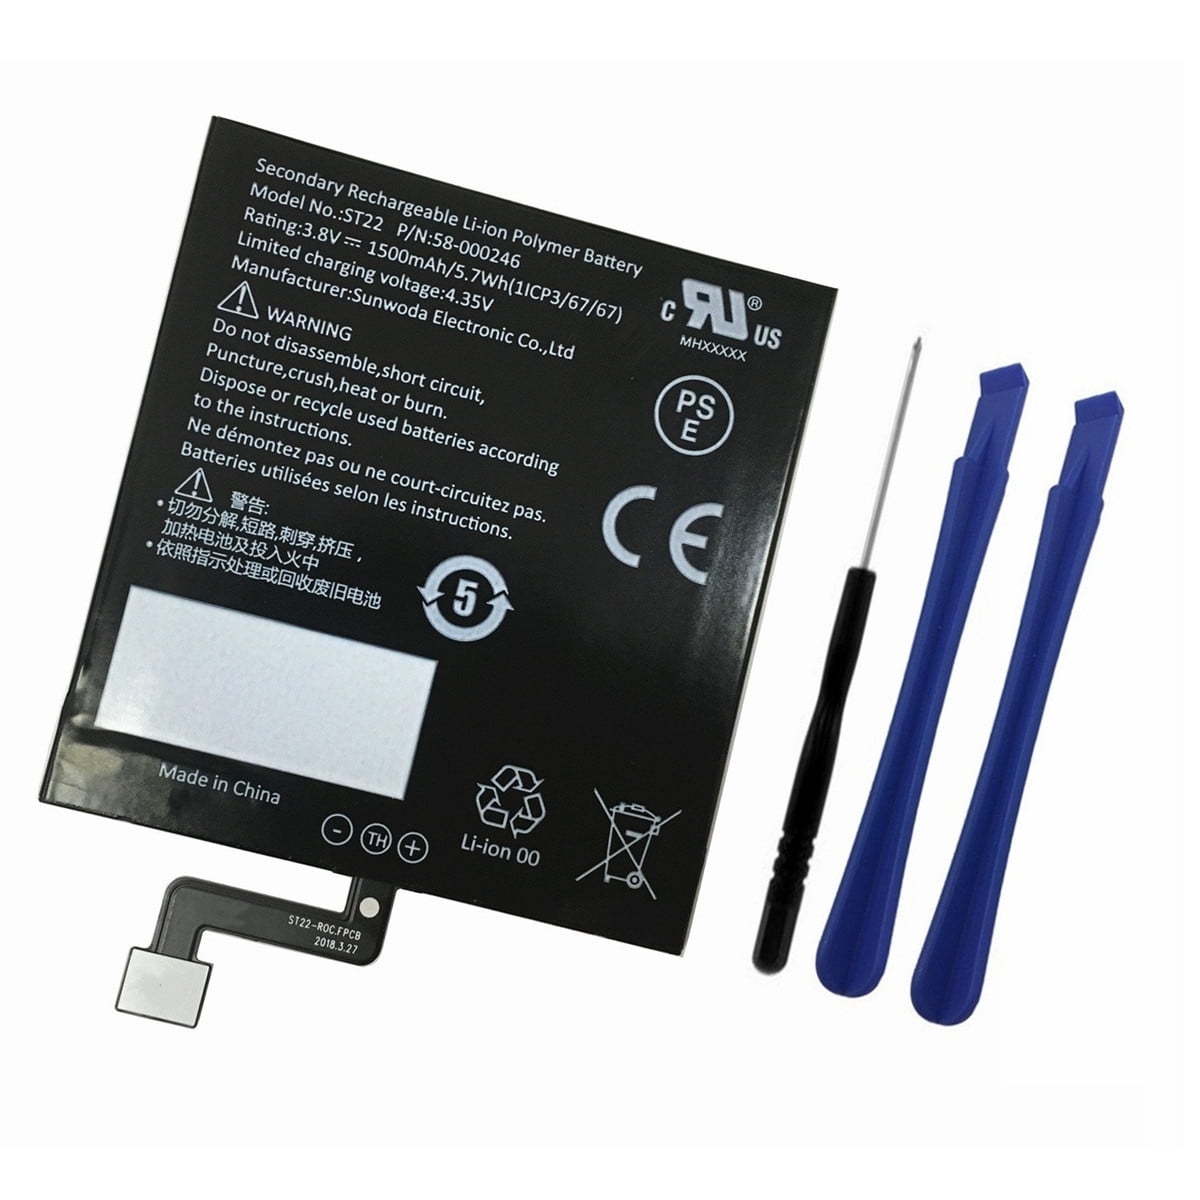 På forhånd Oversigt definitive New Battery ST22 For Amazon Kindle Paperwhite 10th Generation (2018)  PQ94WIF 58-000246 58-000271 MC-266767 26S1017 - Walmart.com